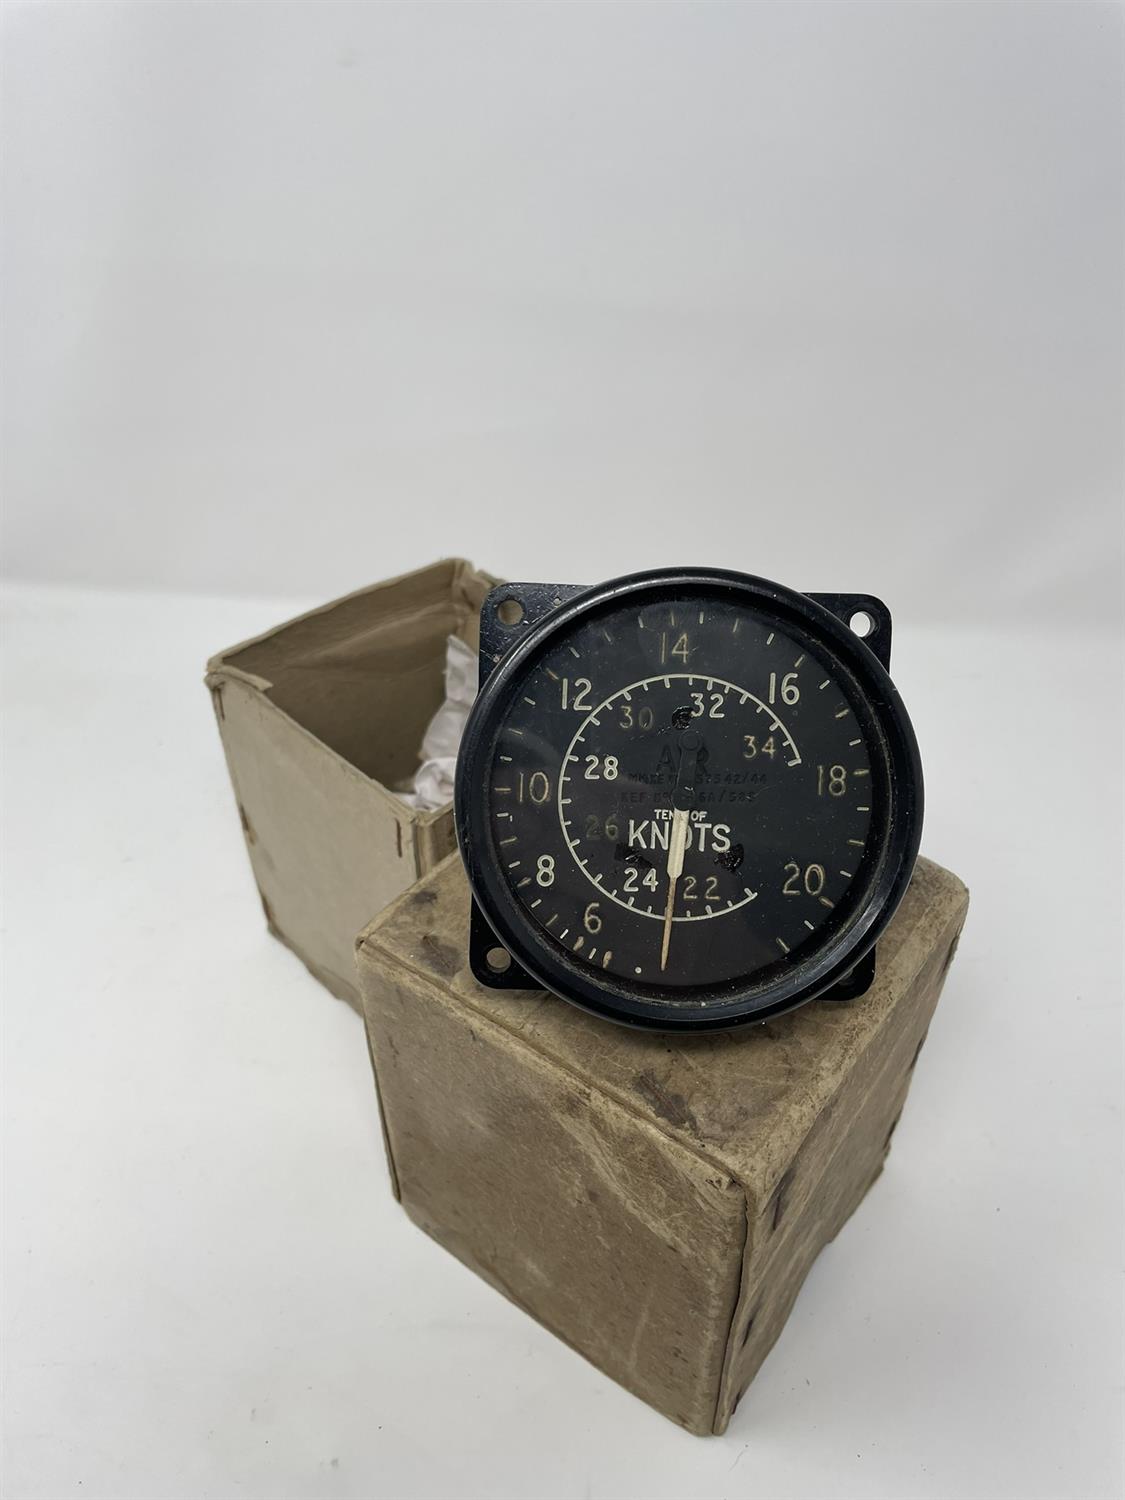 Airspeed Indicator in Knots with Period-Correct Box Dated 1944* - Image 5 of 10